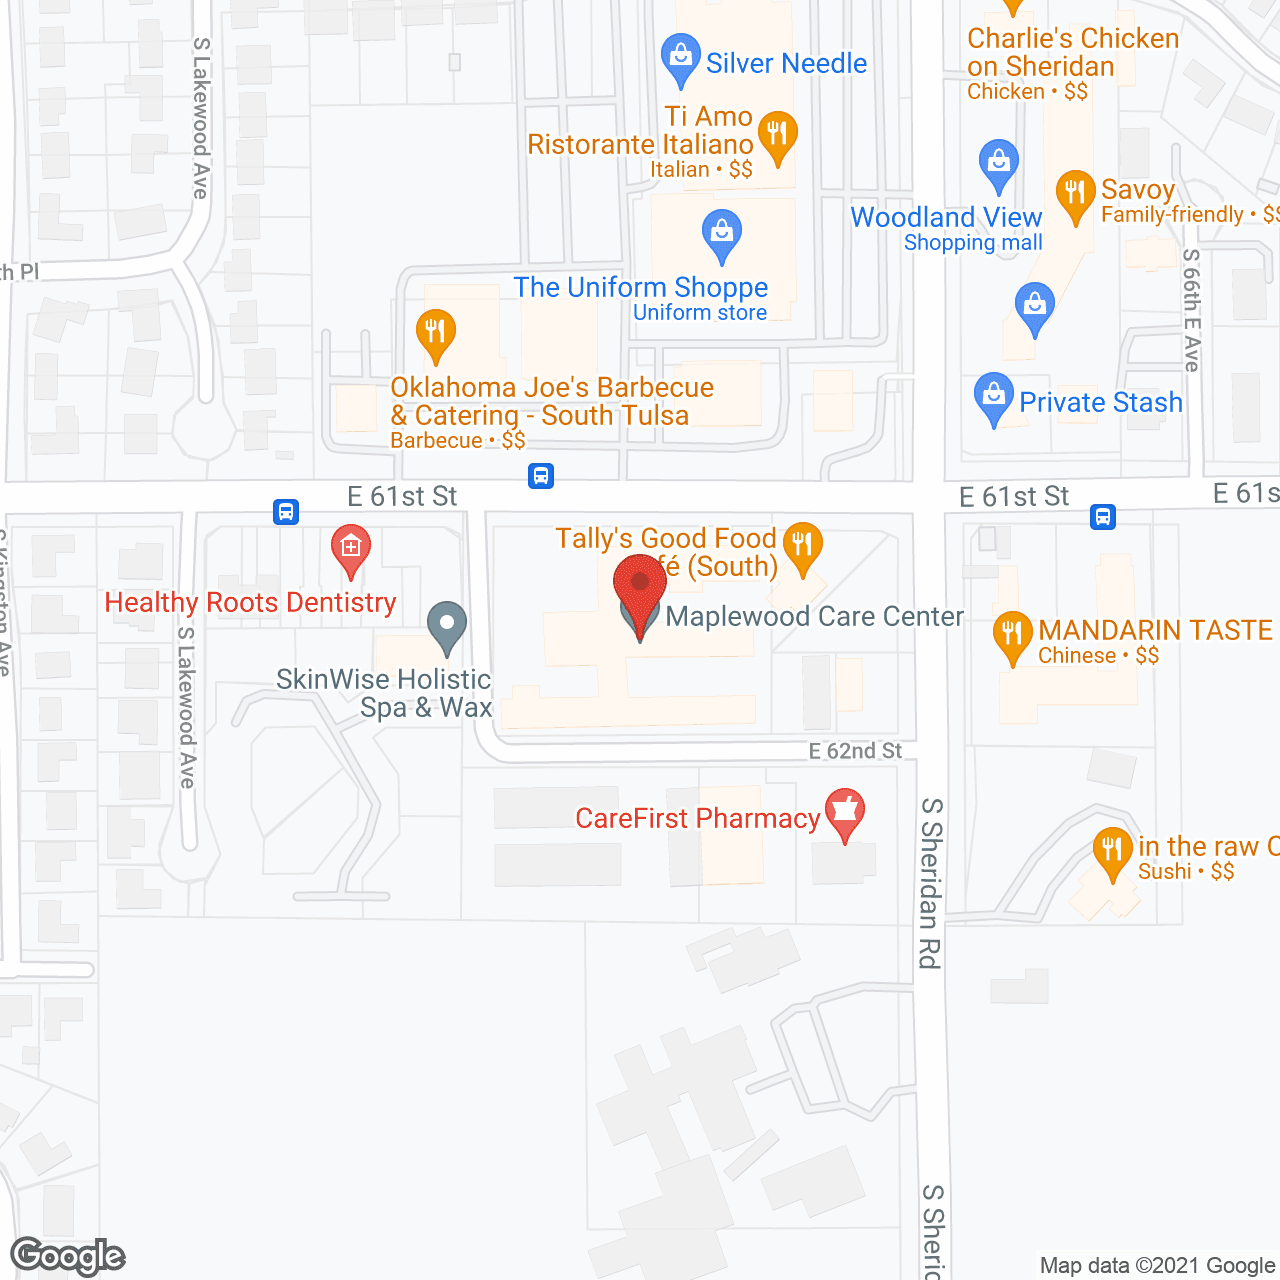 Maplewood Care Center in google map